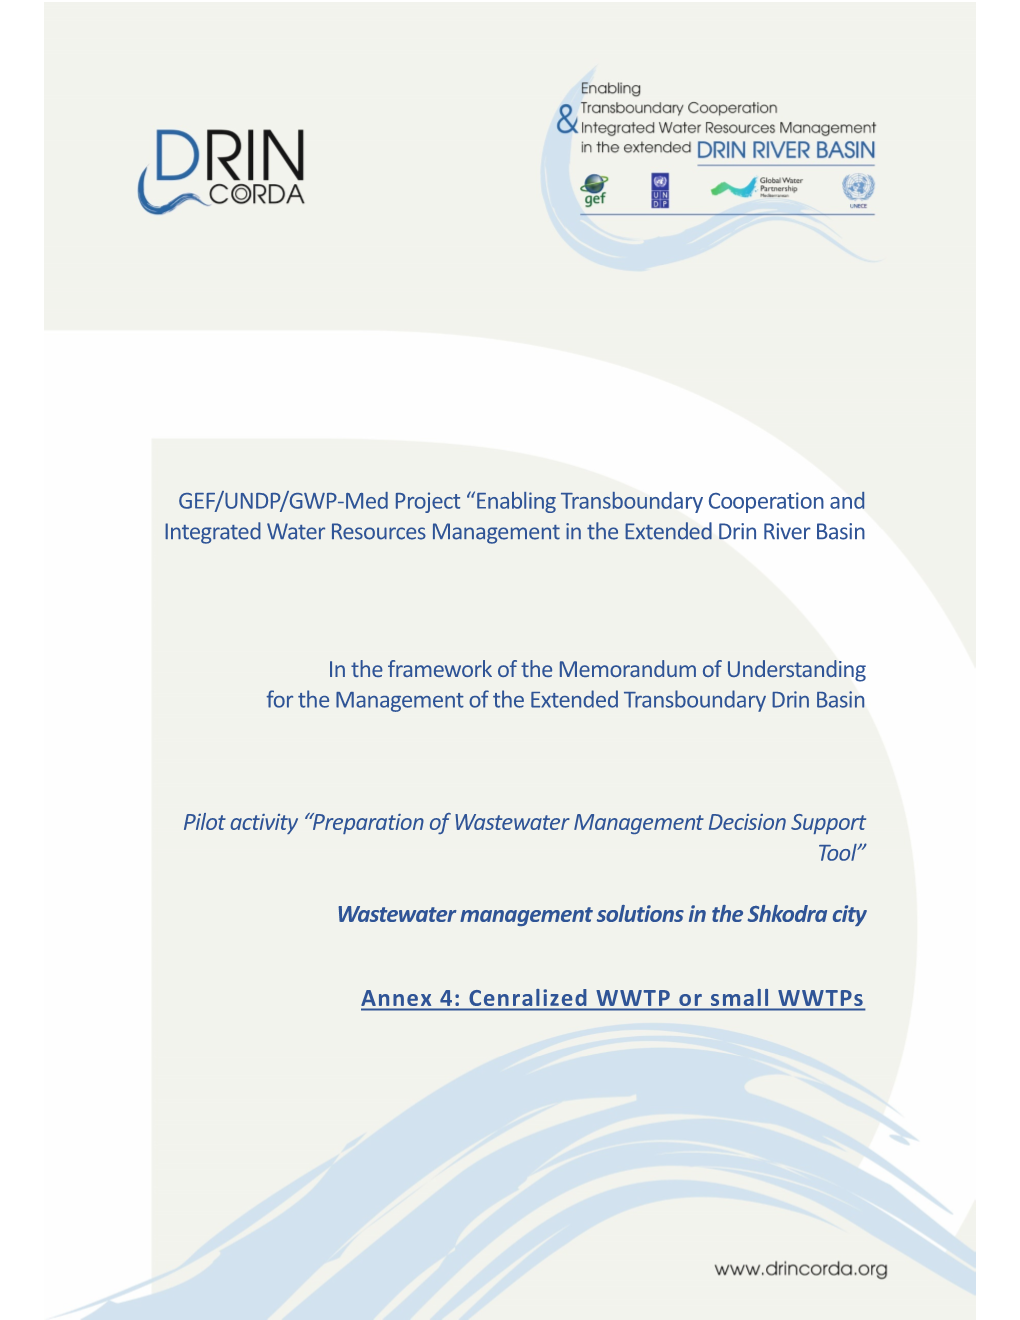 GEF/UNDP/GWP-Med Project “Enabling Transboundary Cooperation and Integrated Water Resources Management in the Extended Drin River Basin